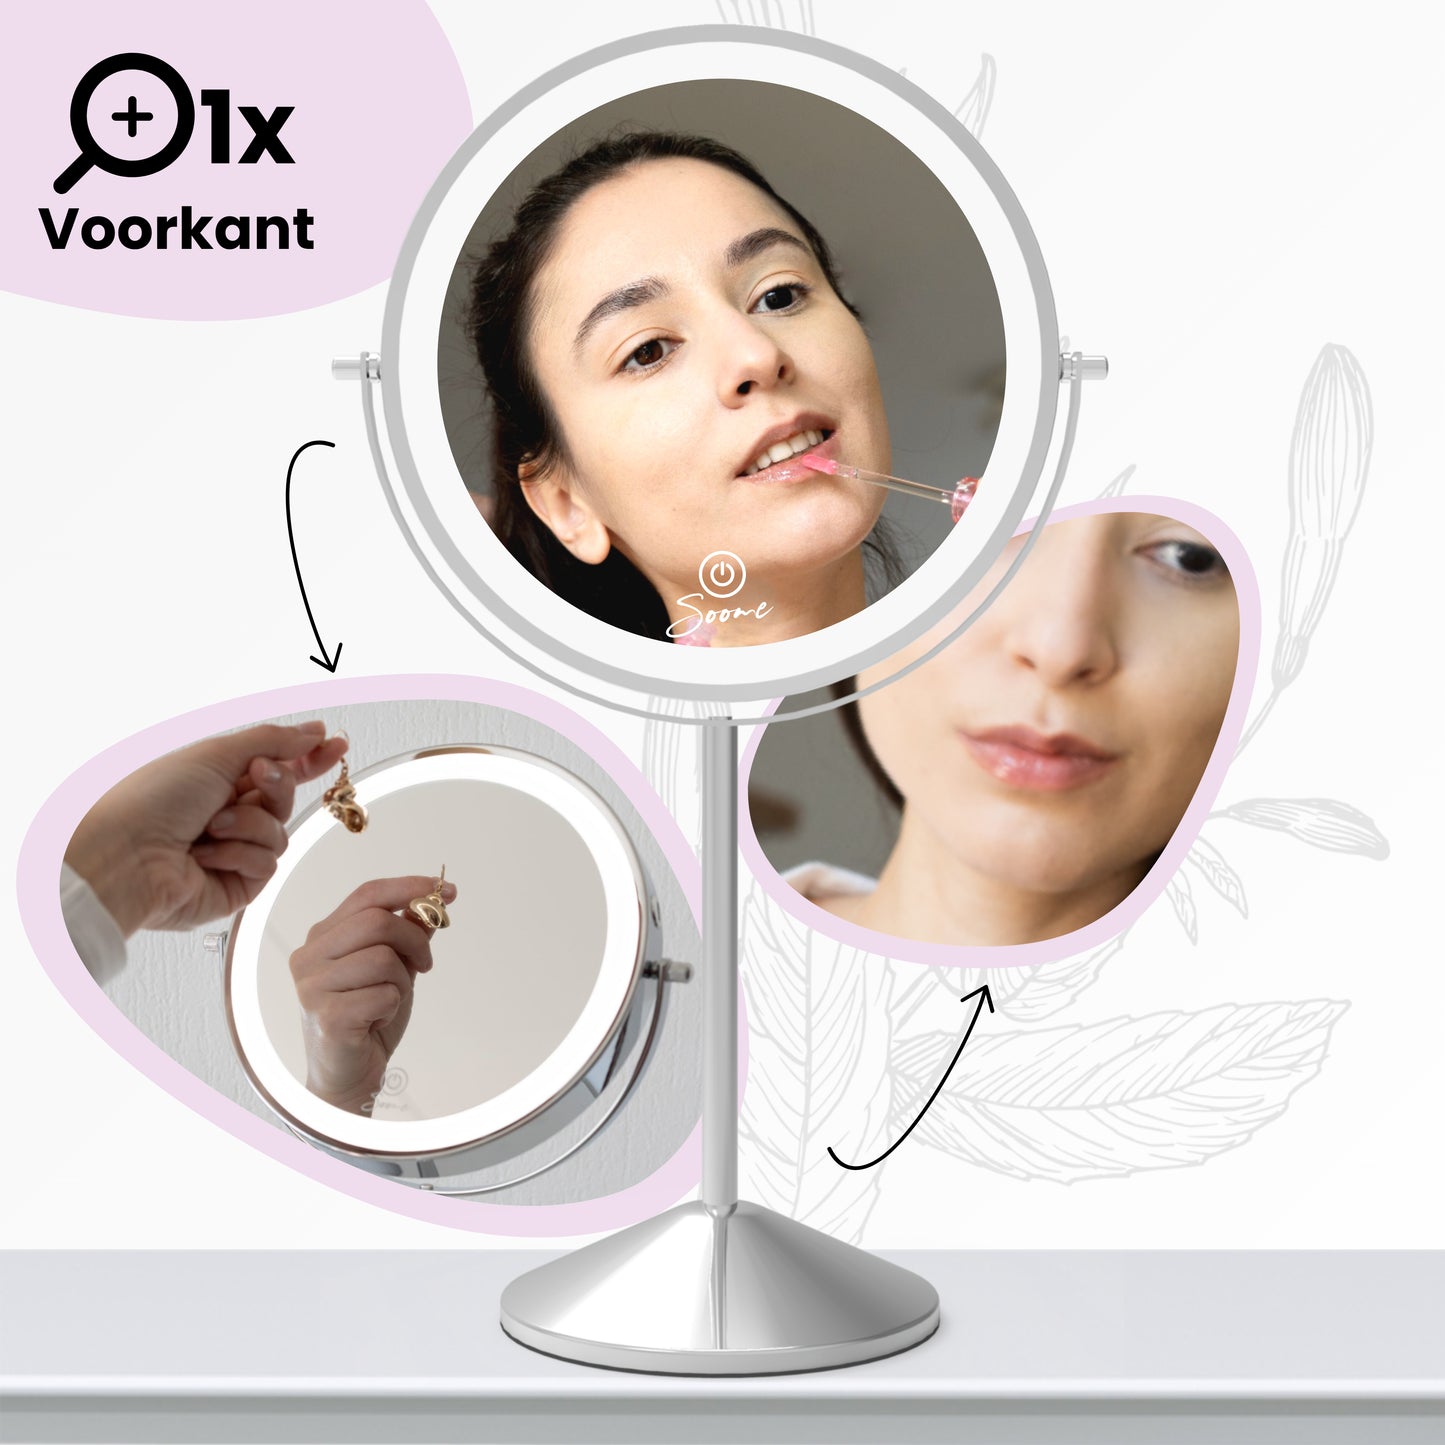 Soome - Valo makeup LED mirror - 5x magnification